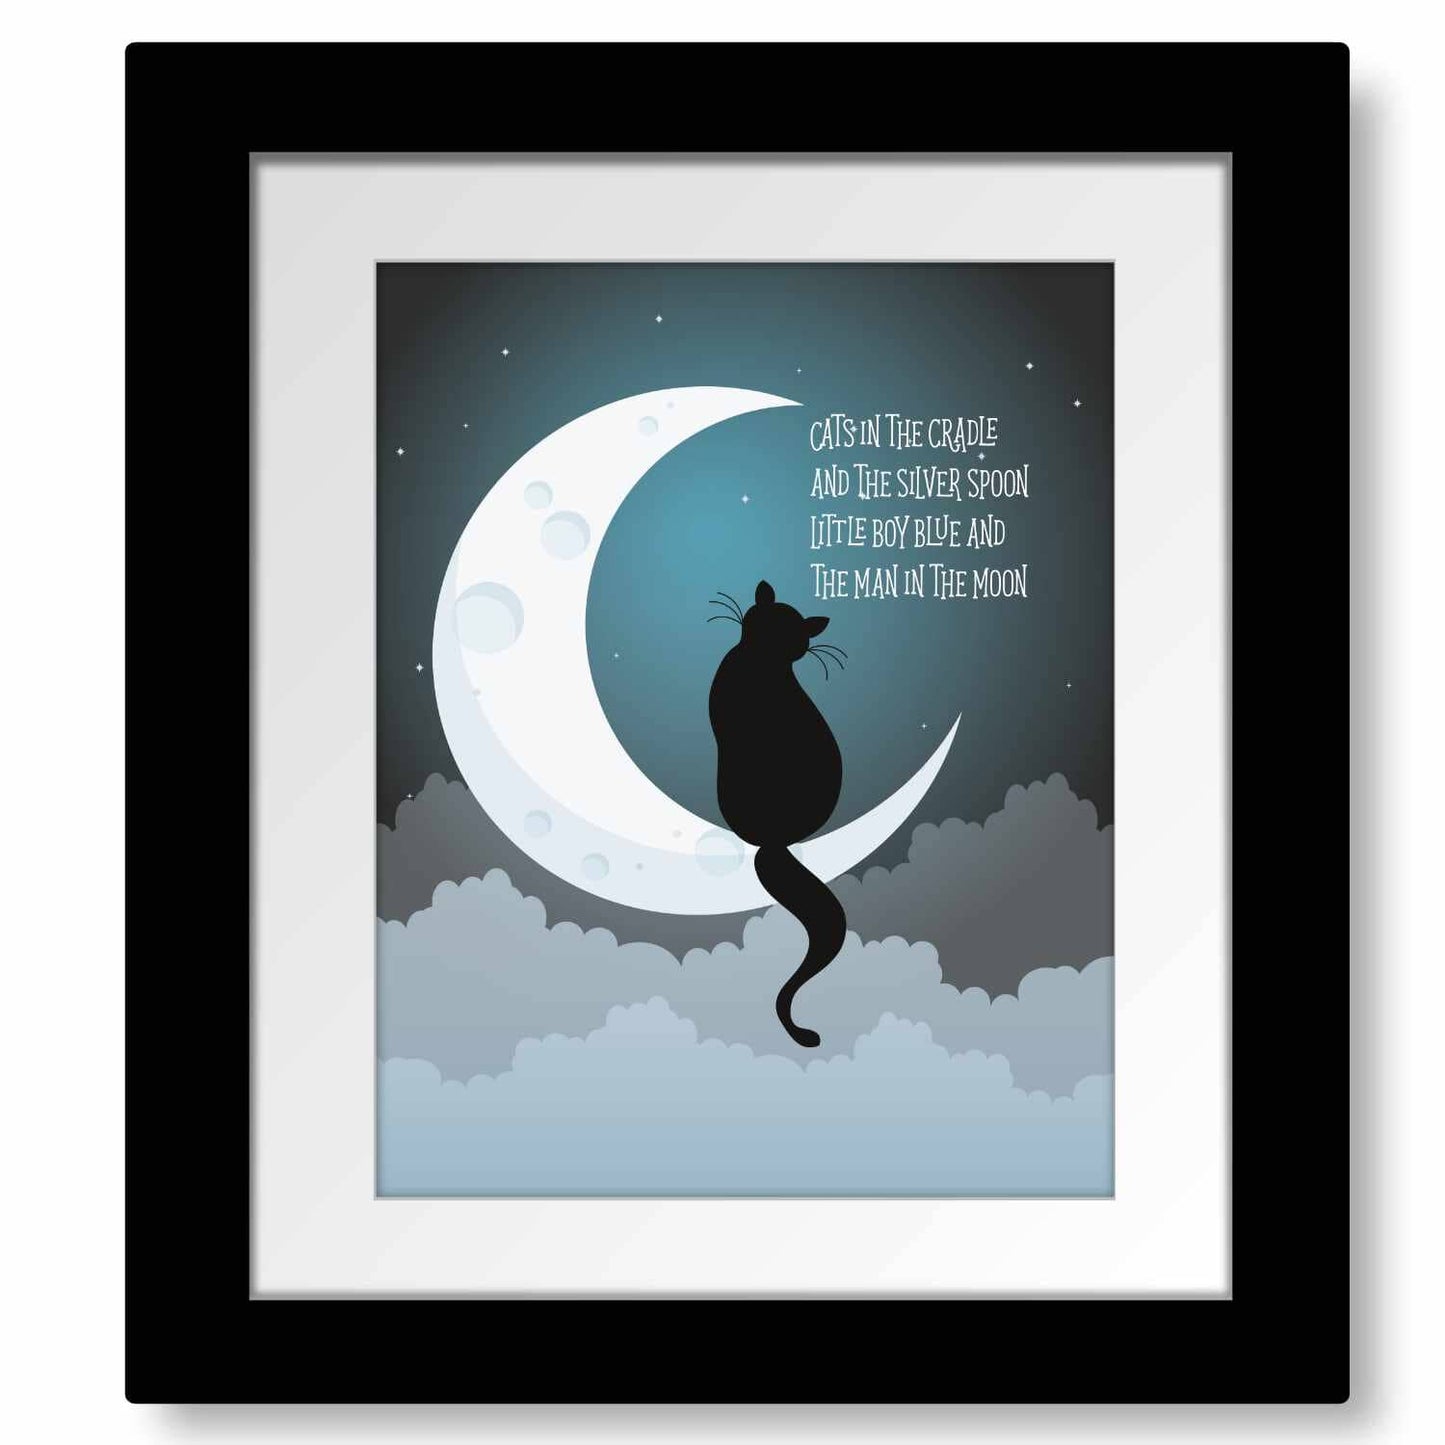 Cats in the Cradle by Harry Chapin - Children's 70s Lyric Art Song Lyrics Art Song Lyrics Art 8x10 Framed Matted Print 